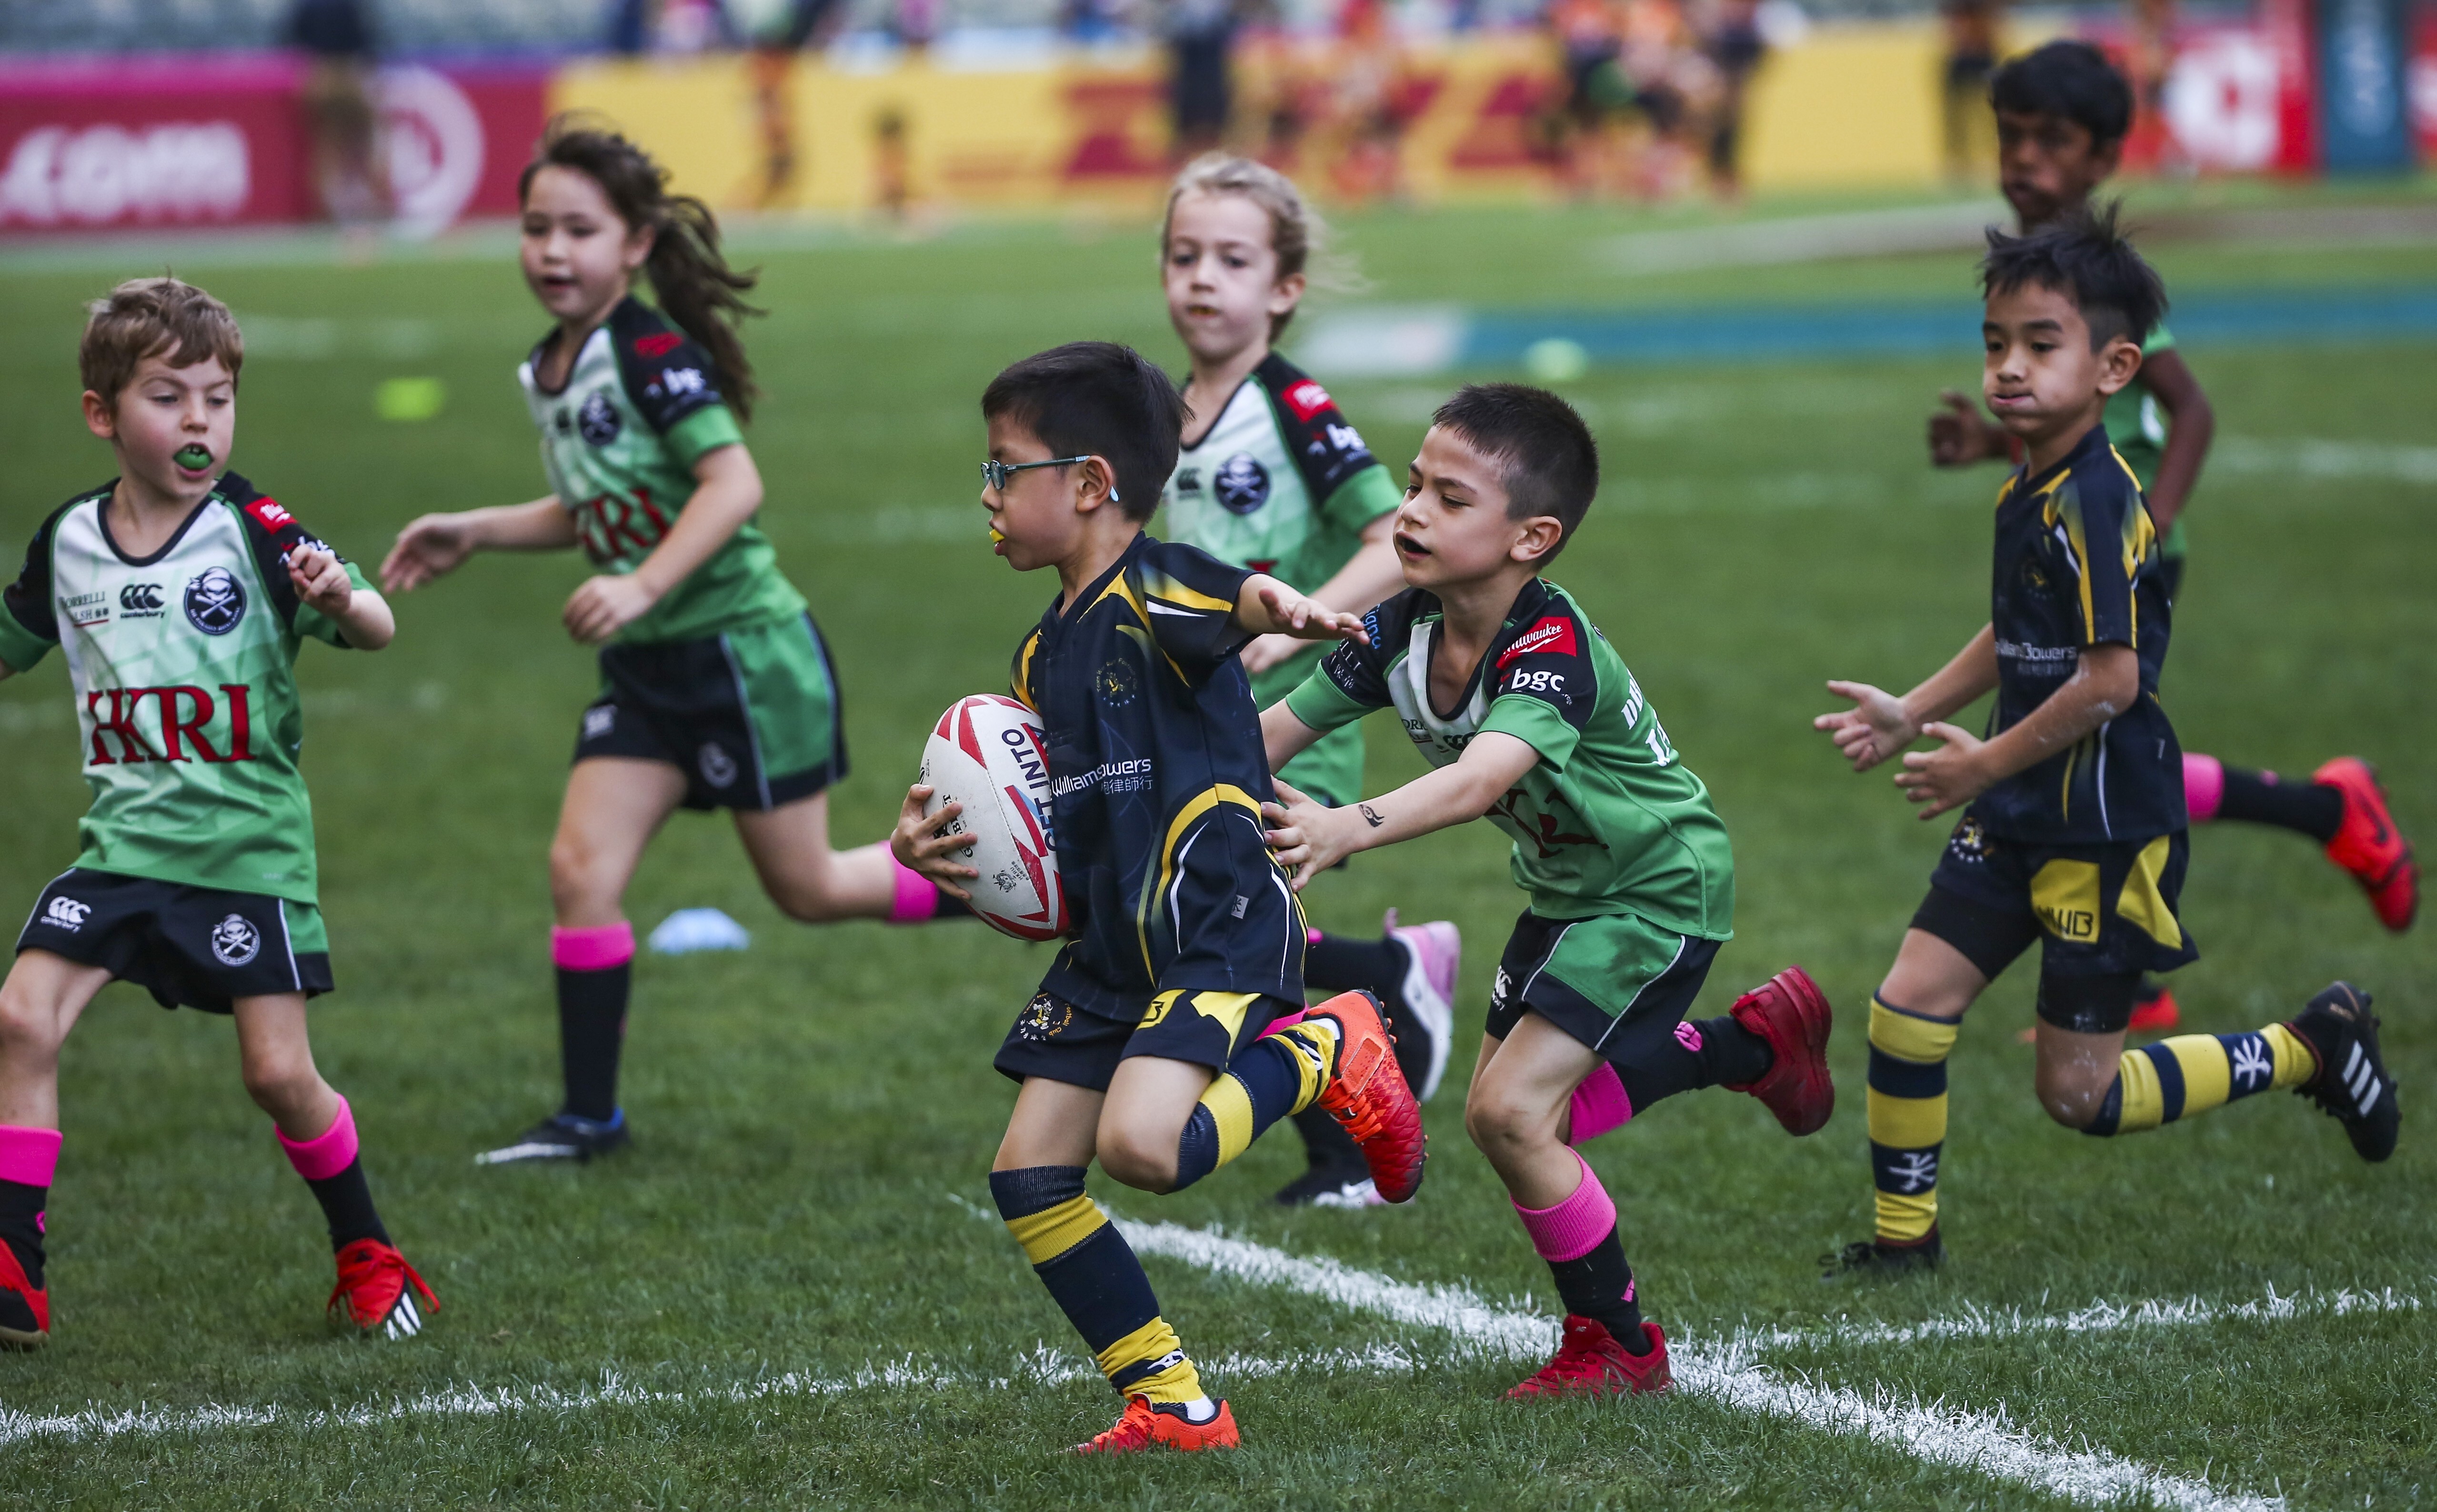 Boys and girls play together in a mini rugby game at the Hong Kong Sevens in 2019. Photo: Jonathan Wong